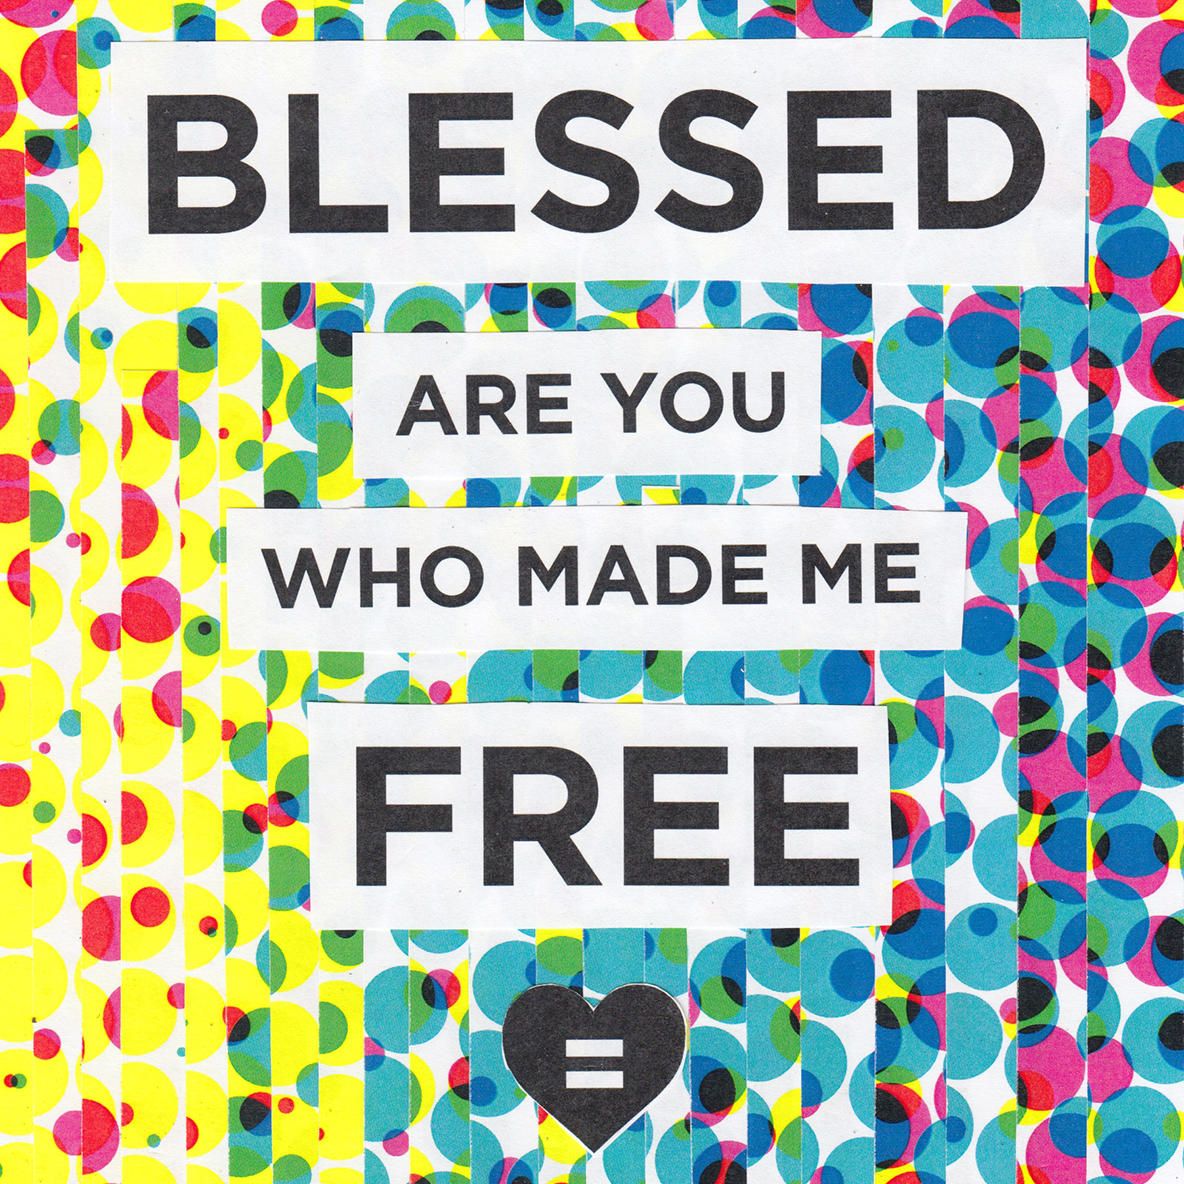 Blessed are you who made me free